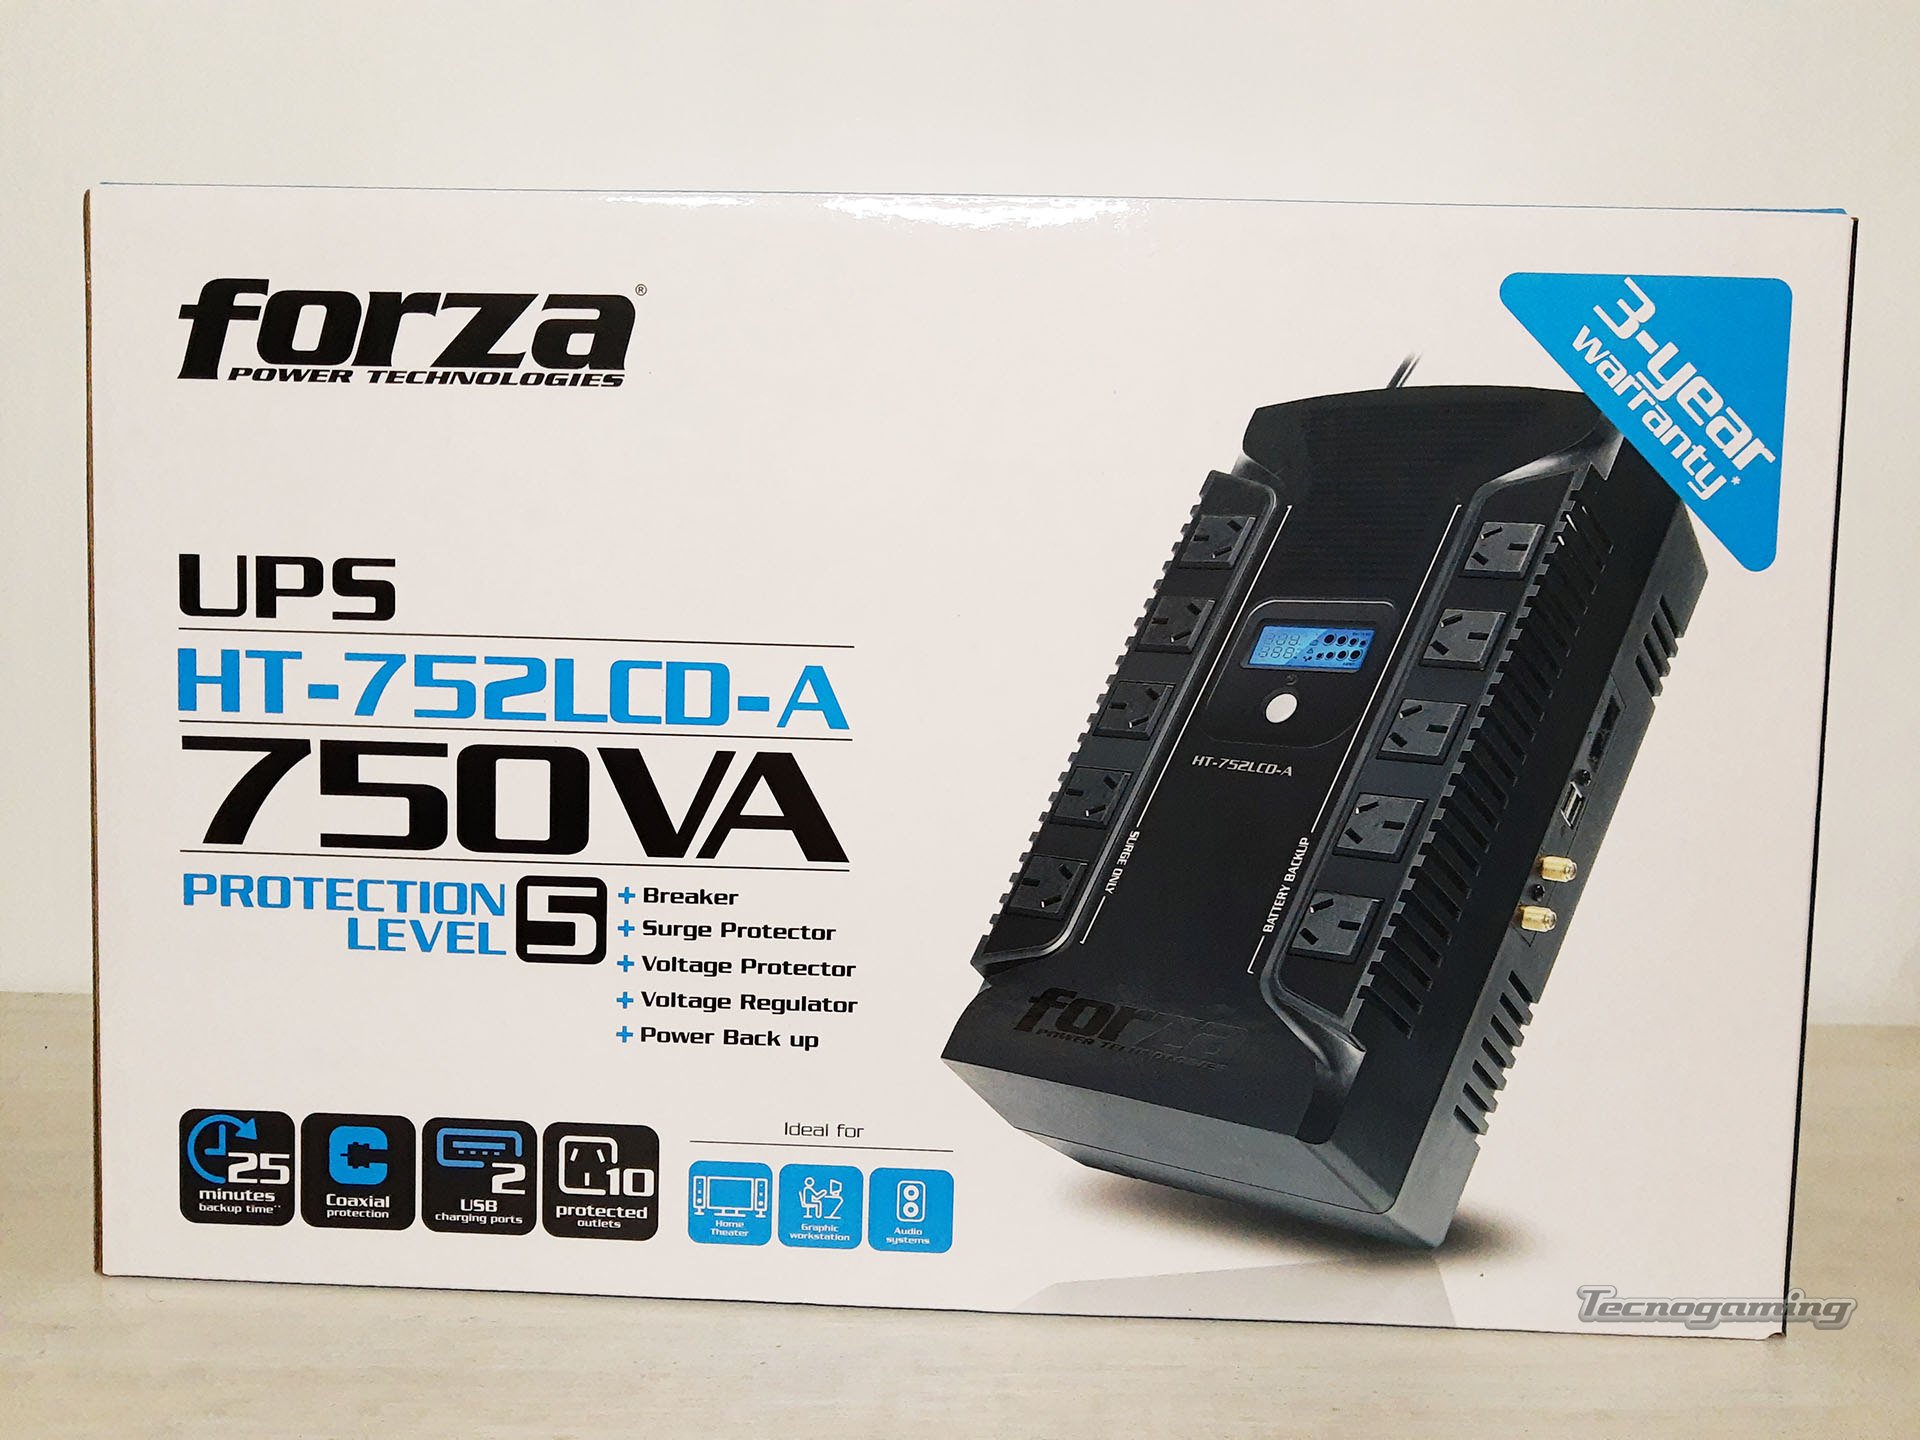 Forza HT-752LCD-A - Review UPS